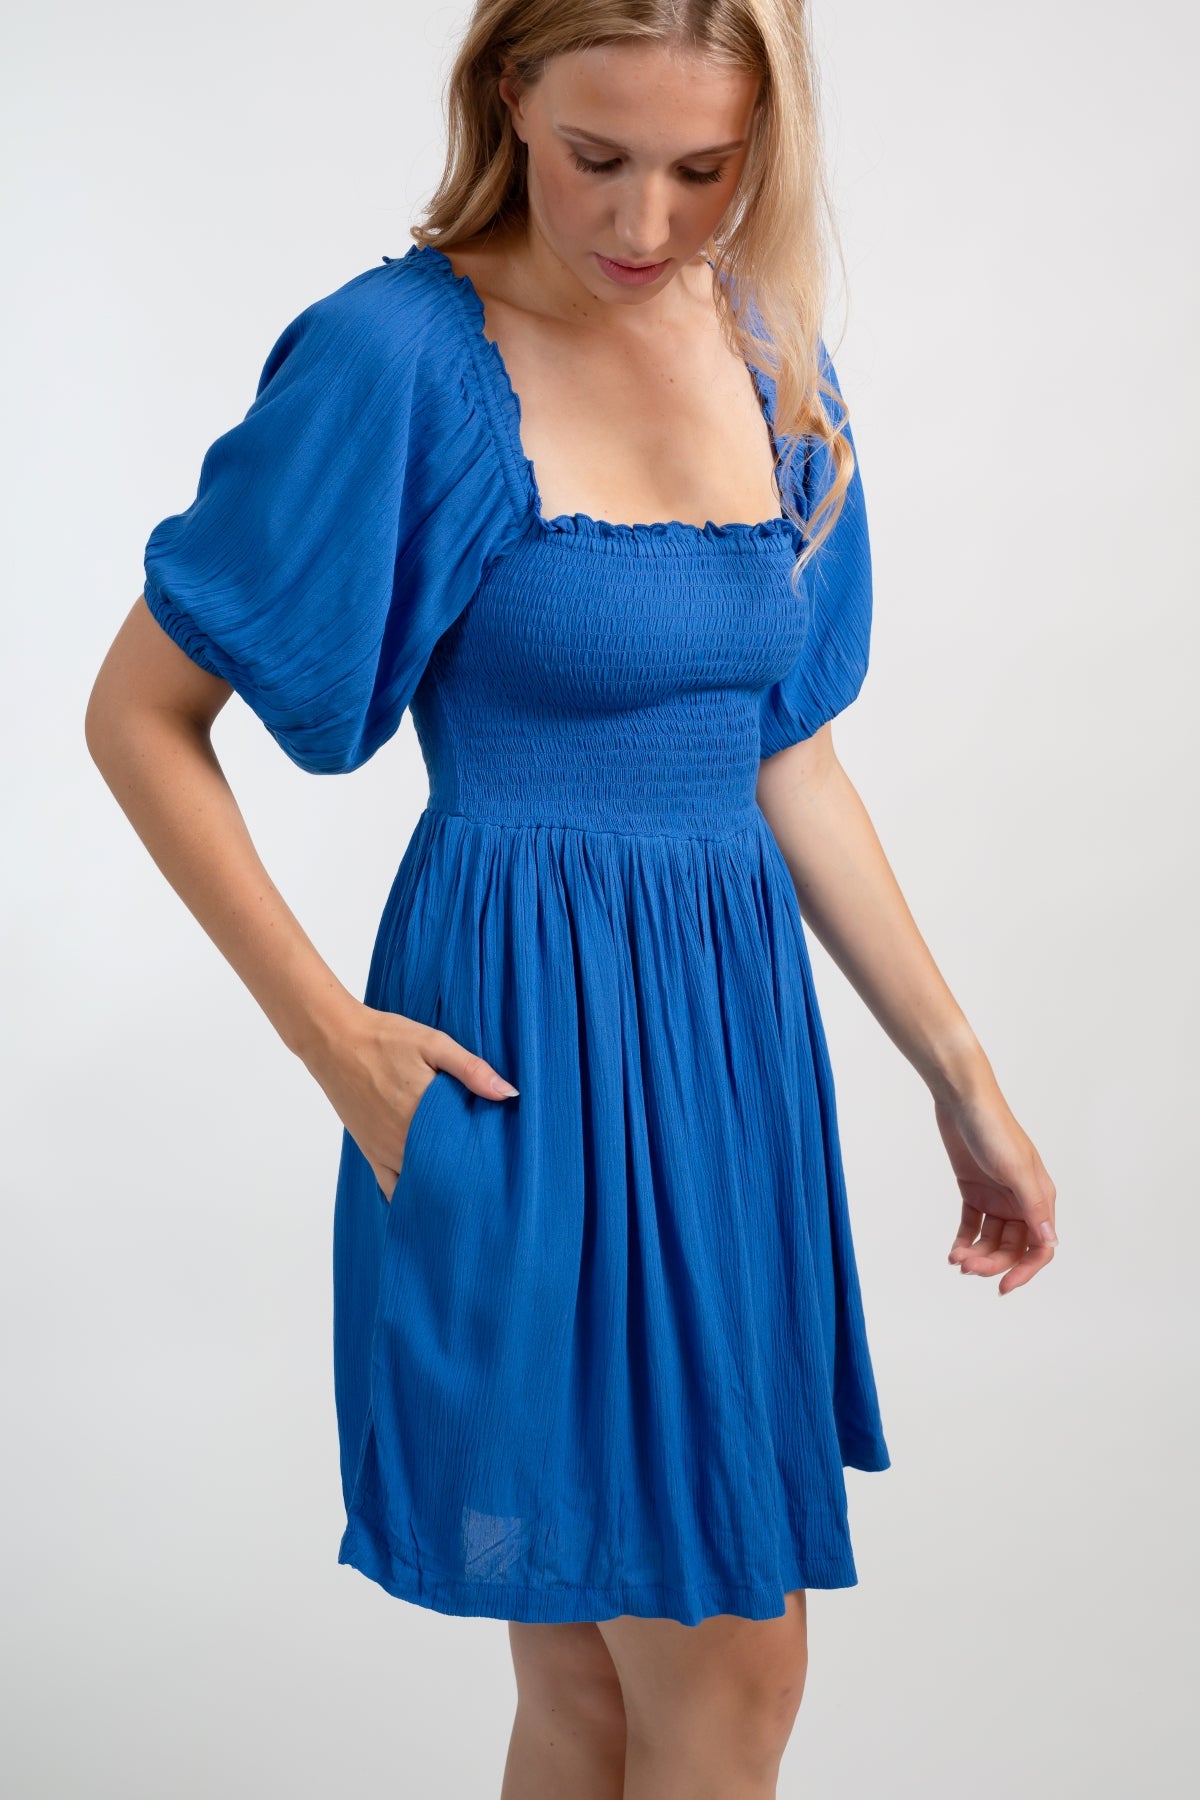 Blonde model facing side close up, wearing Blue Cobalt Miami Smocked Mini Dress. Features a smocked bodice for a figure-flattering fit and puffy peasant-style sleeves for a bohemian touch. Perfect for the beach, a summer wedding, or a night out. Koy Resort affordable vacation, cruise, and resort-wear.sort-wear.